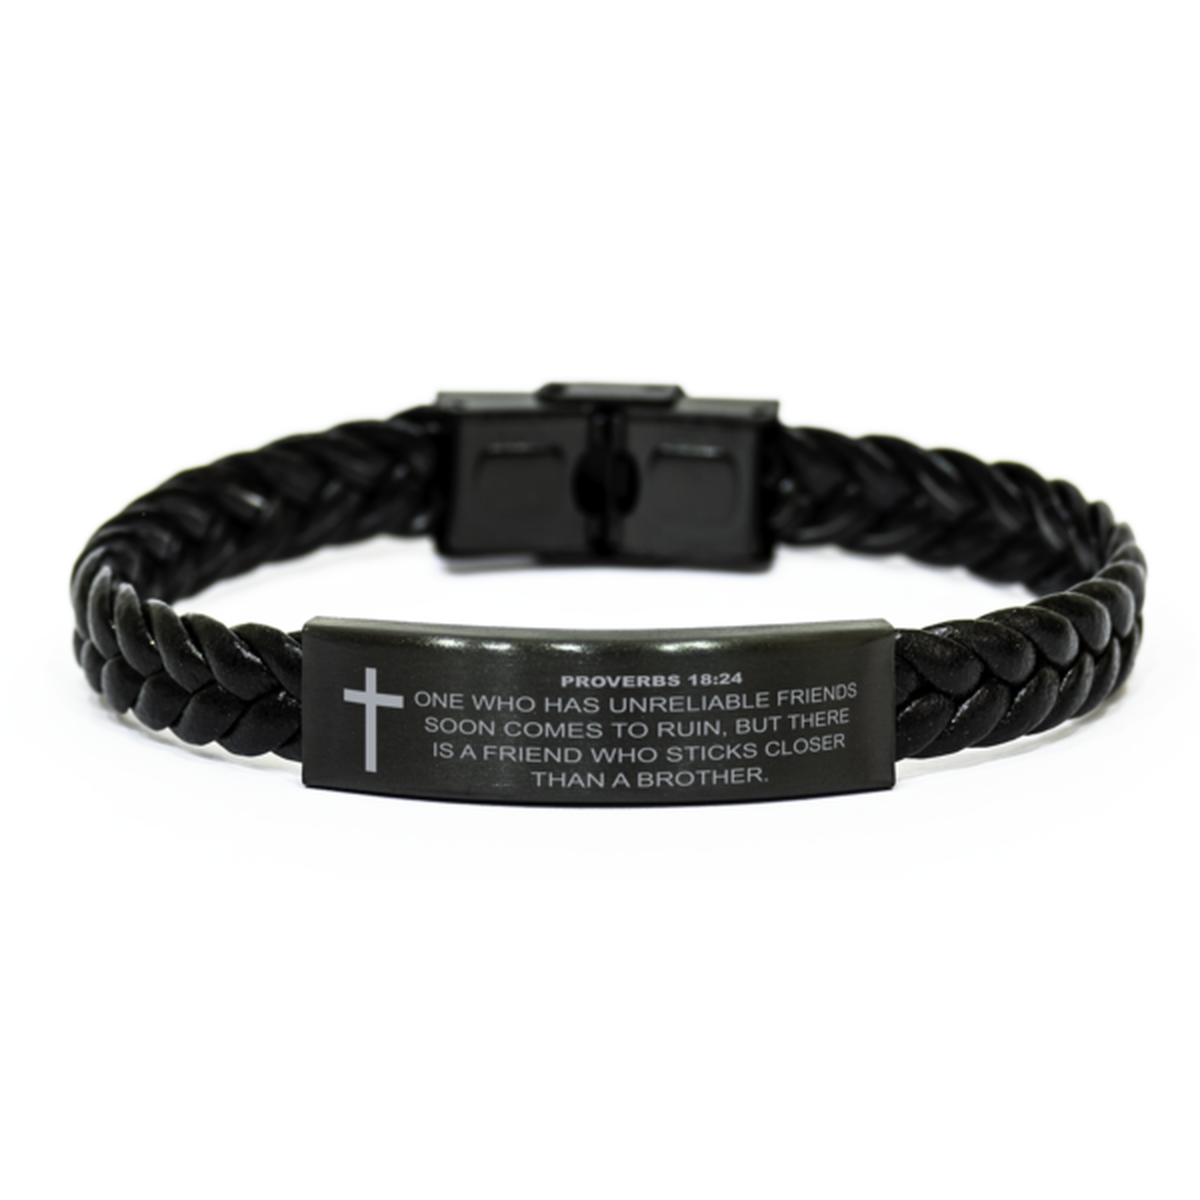 Proverbs 18:24 Bracelet, There Is A Friend Who Sticks Closer Than A Brother, Bible Verse Bracelet, Christian Bracelet, Braided Leather Bracelet